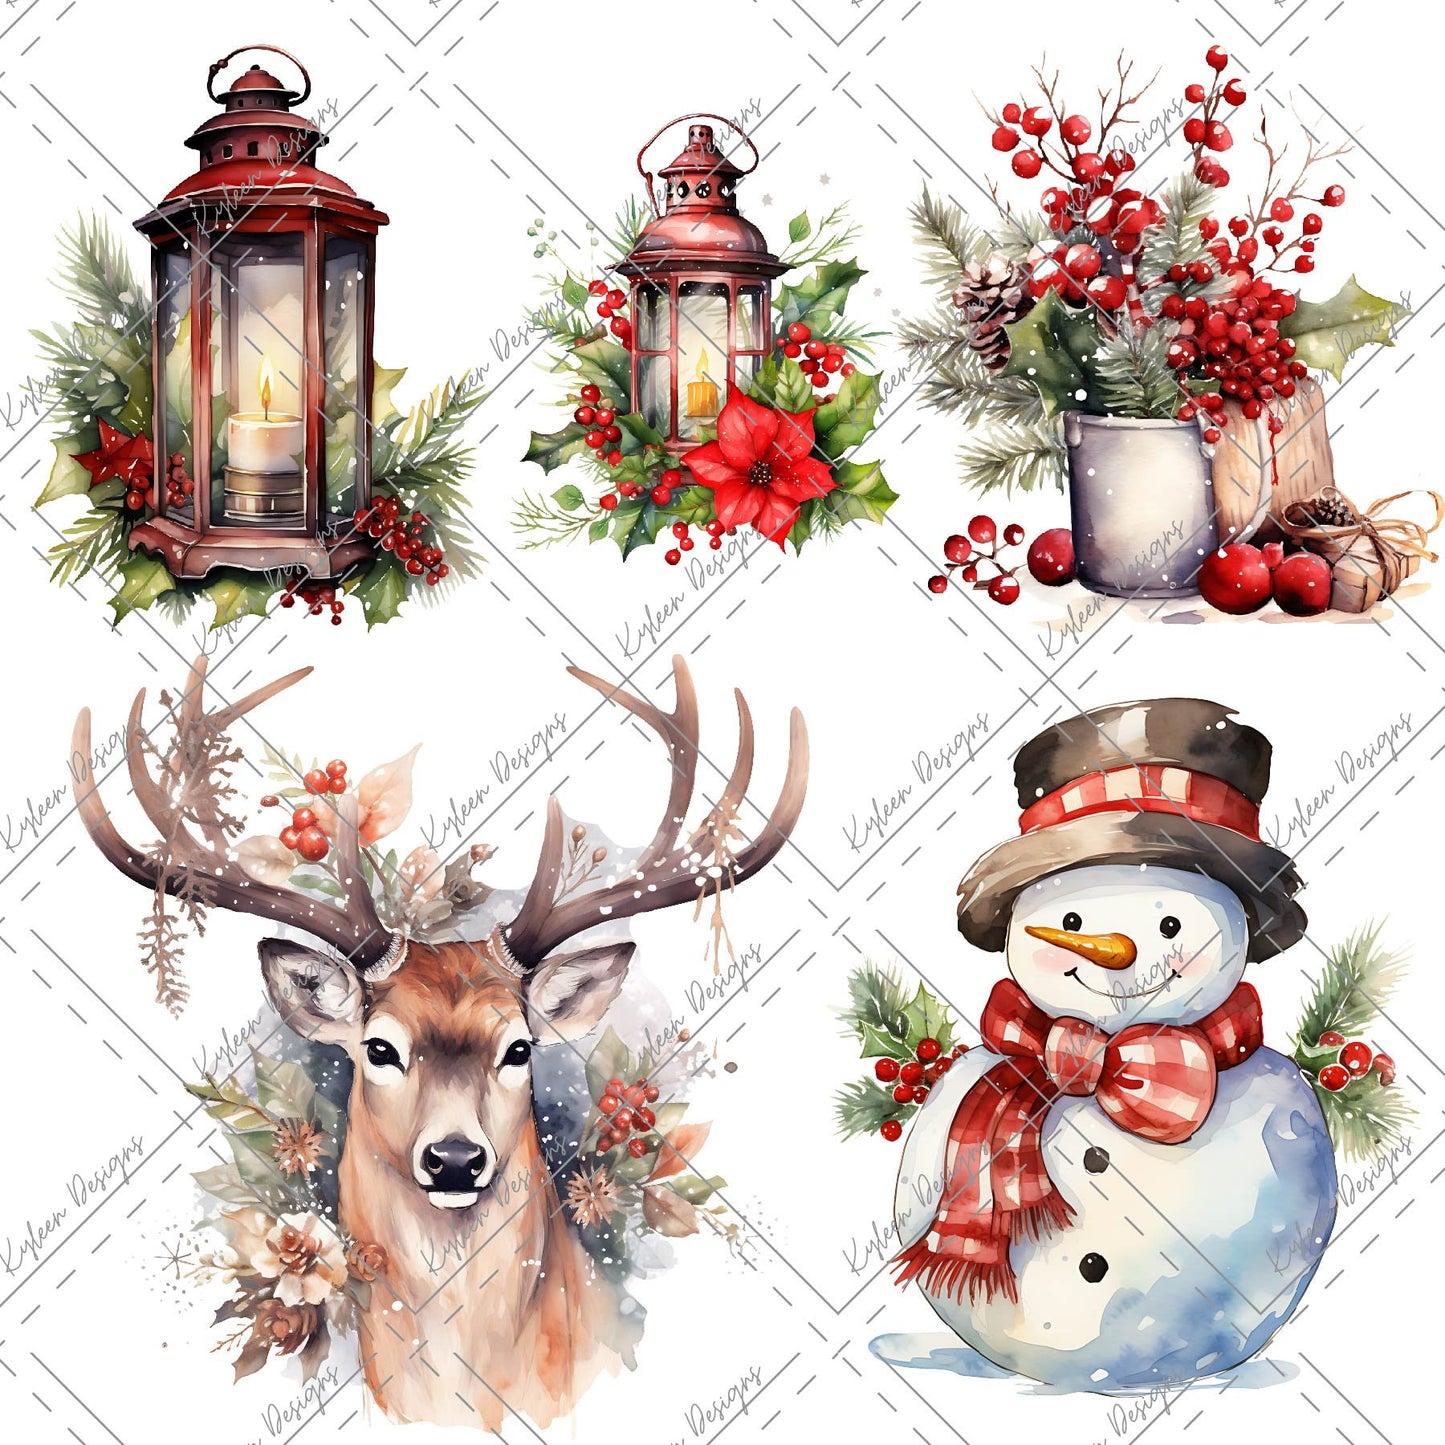 Cast Vinyl Element Sheets- Choose from White or Transparent Vinyl- Traditional Christmas